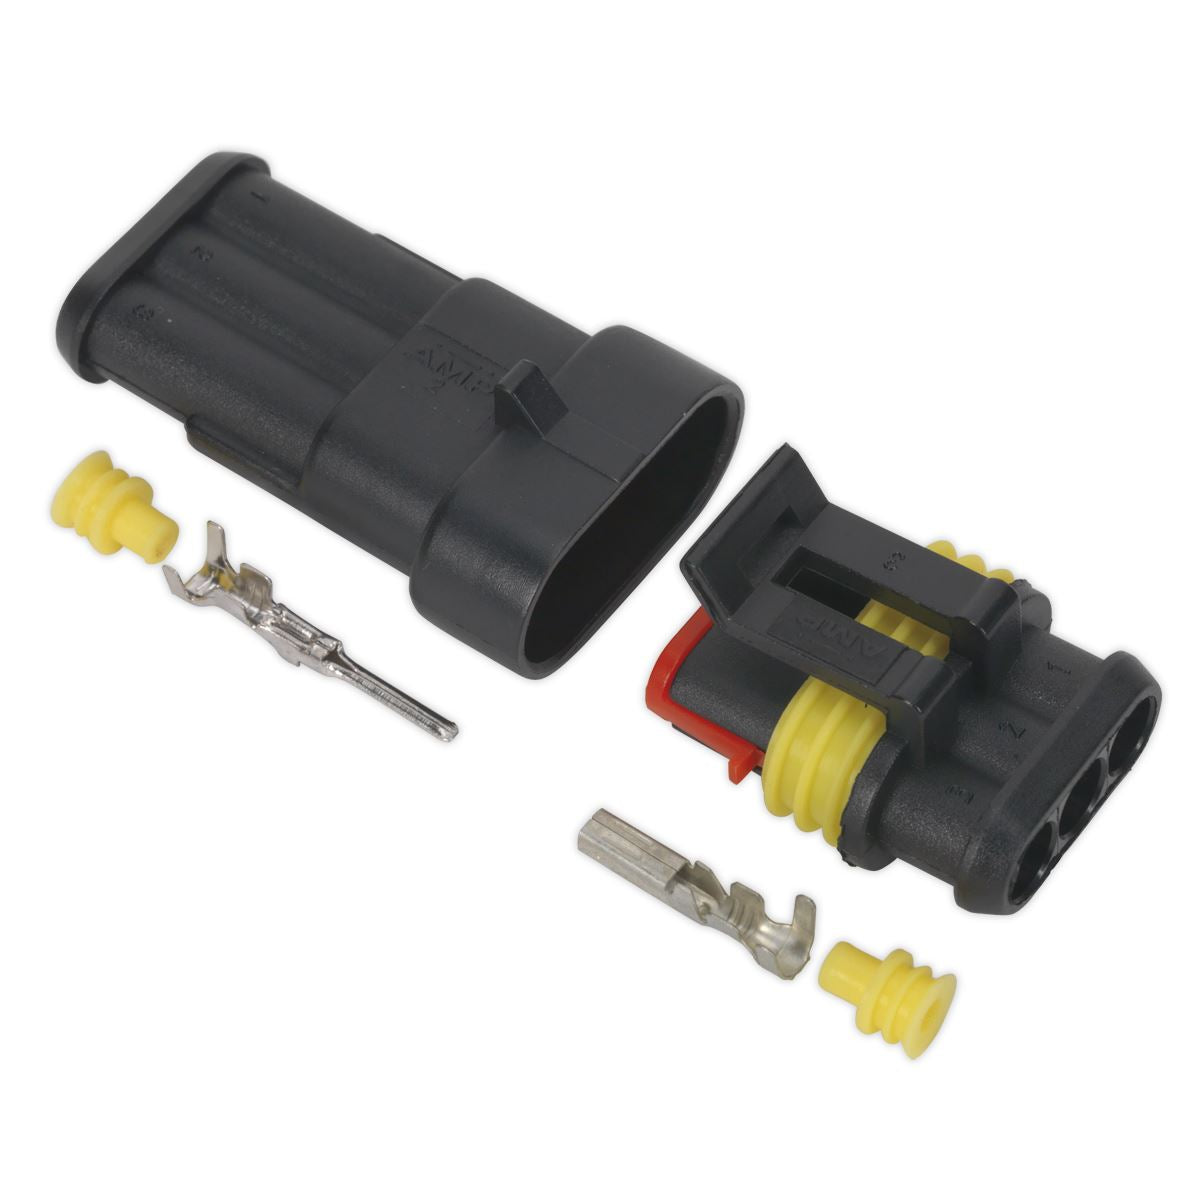 Sealey Superseal Male & Female Connector 3-Way